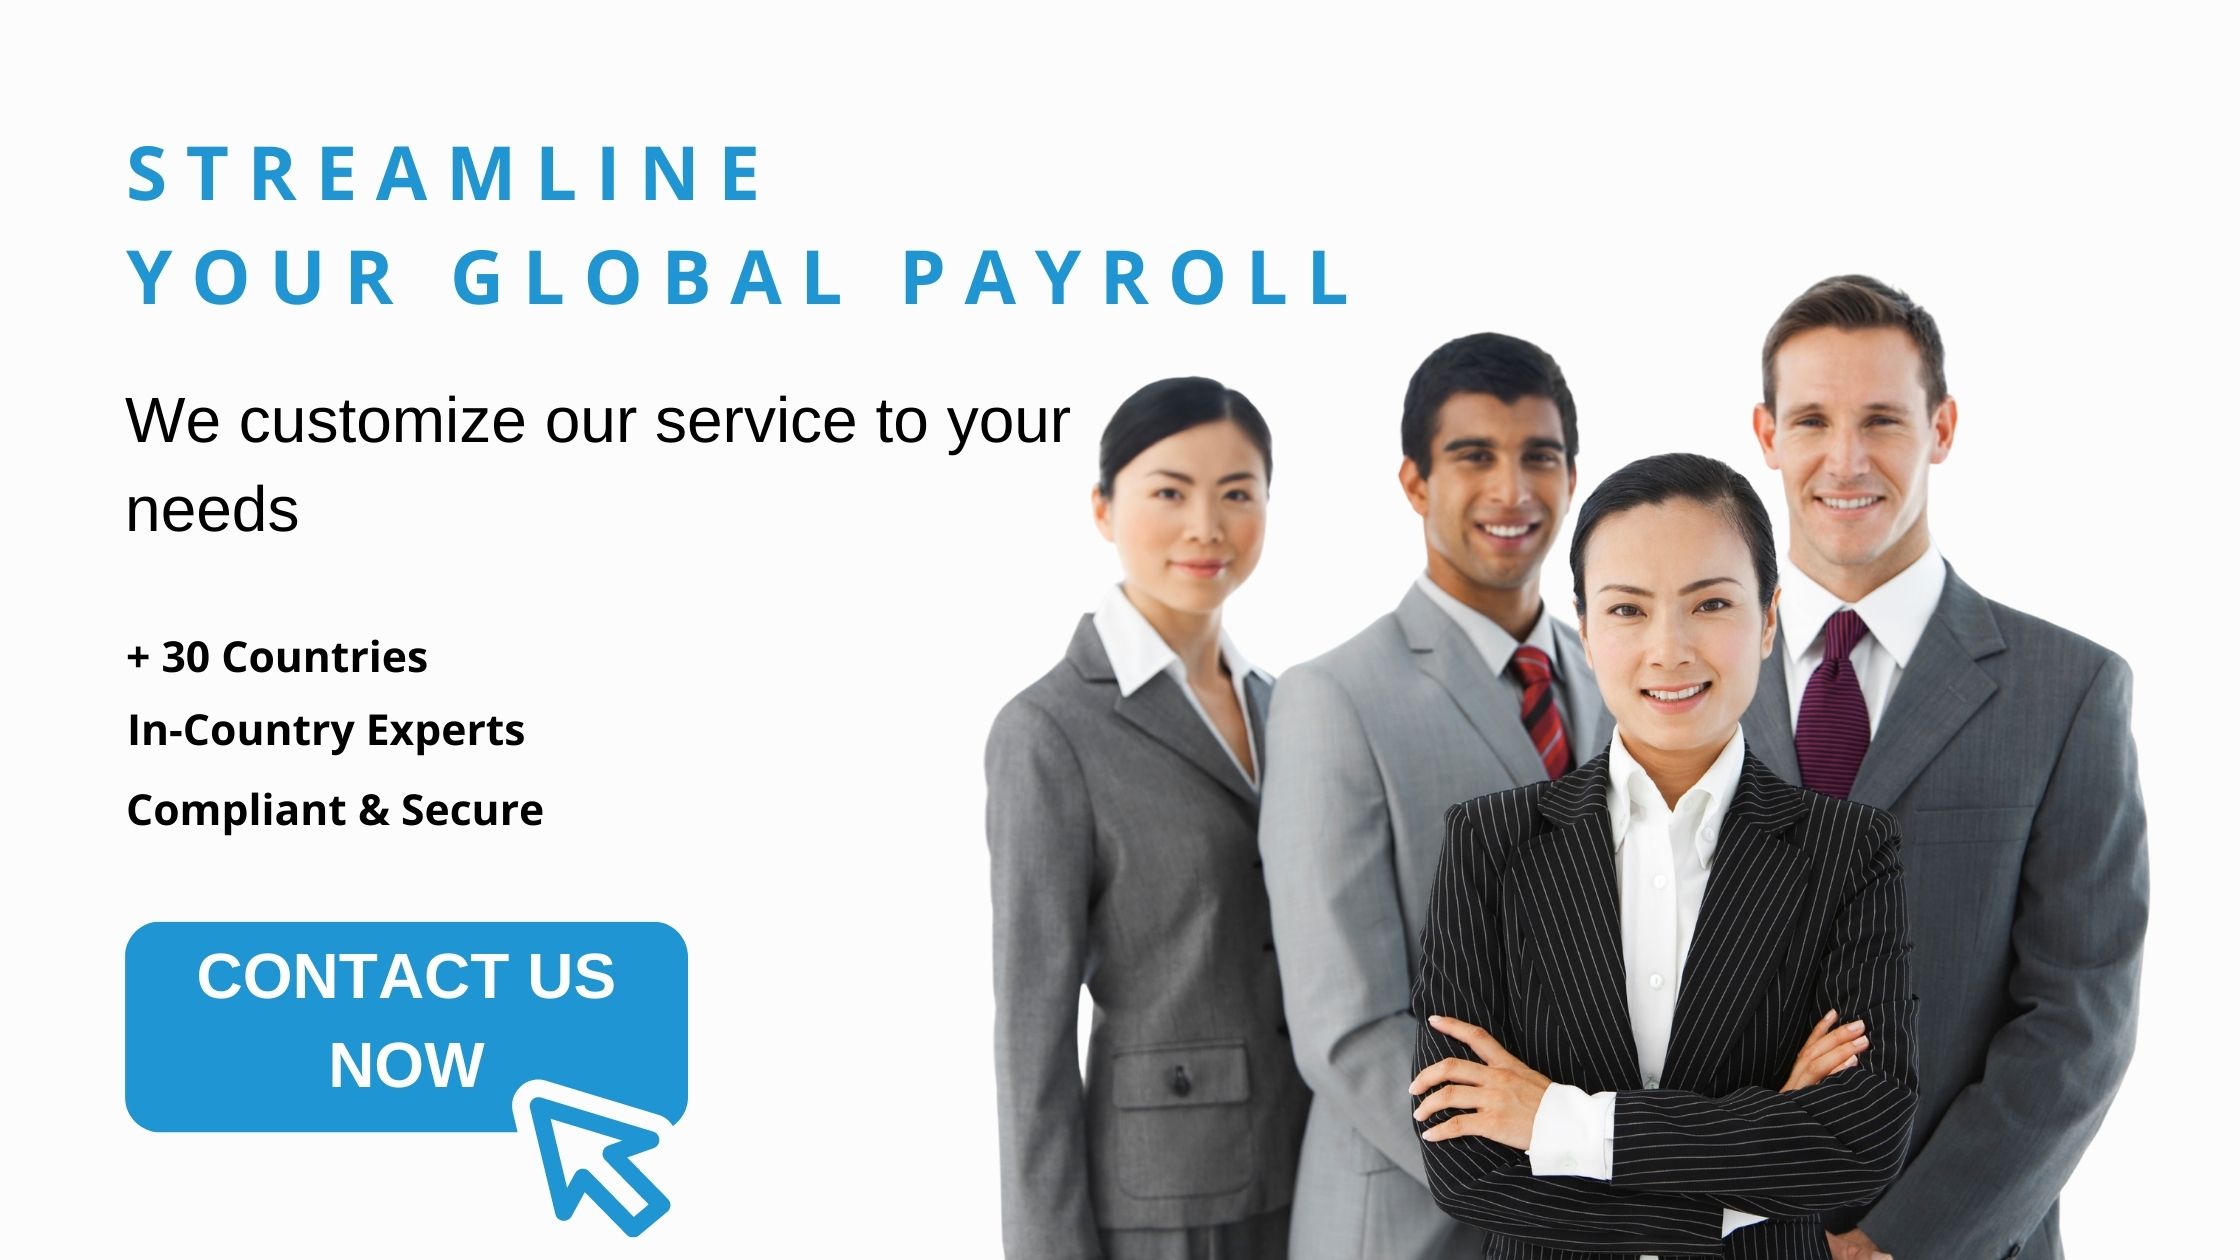 Image Ad about Global Payroll Services